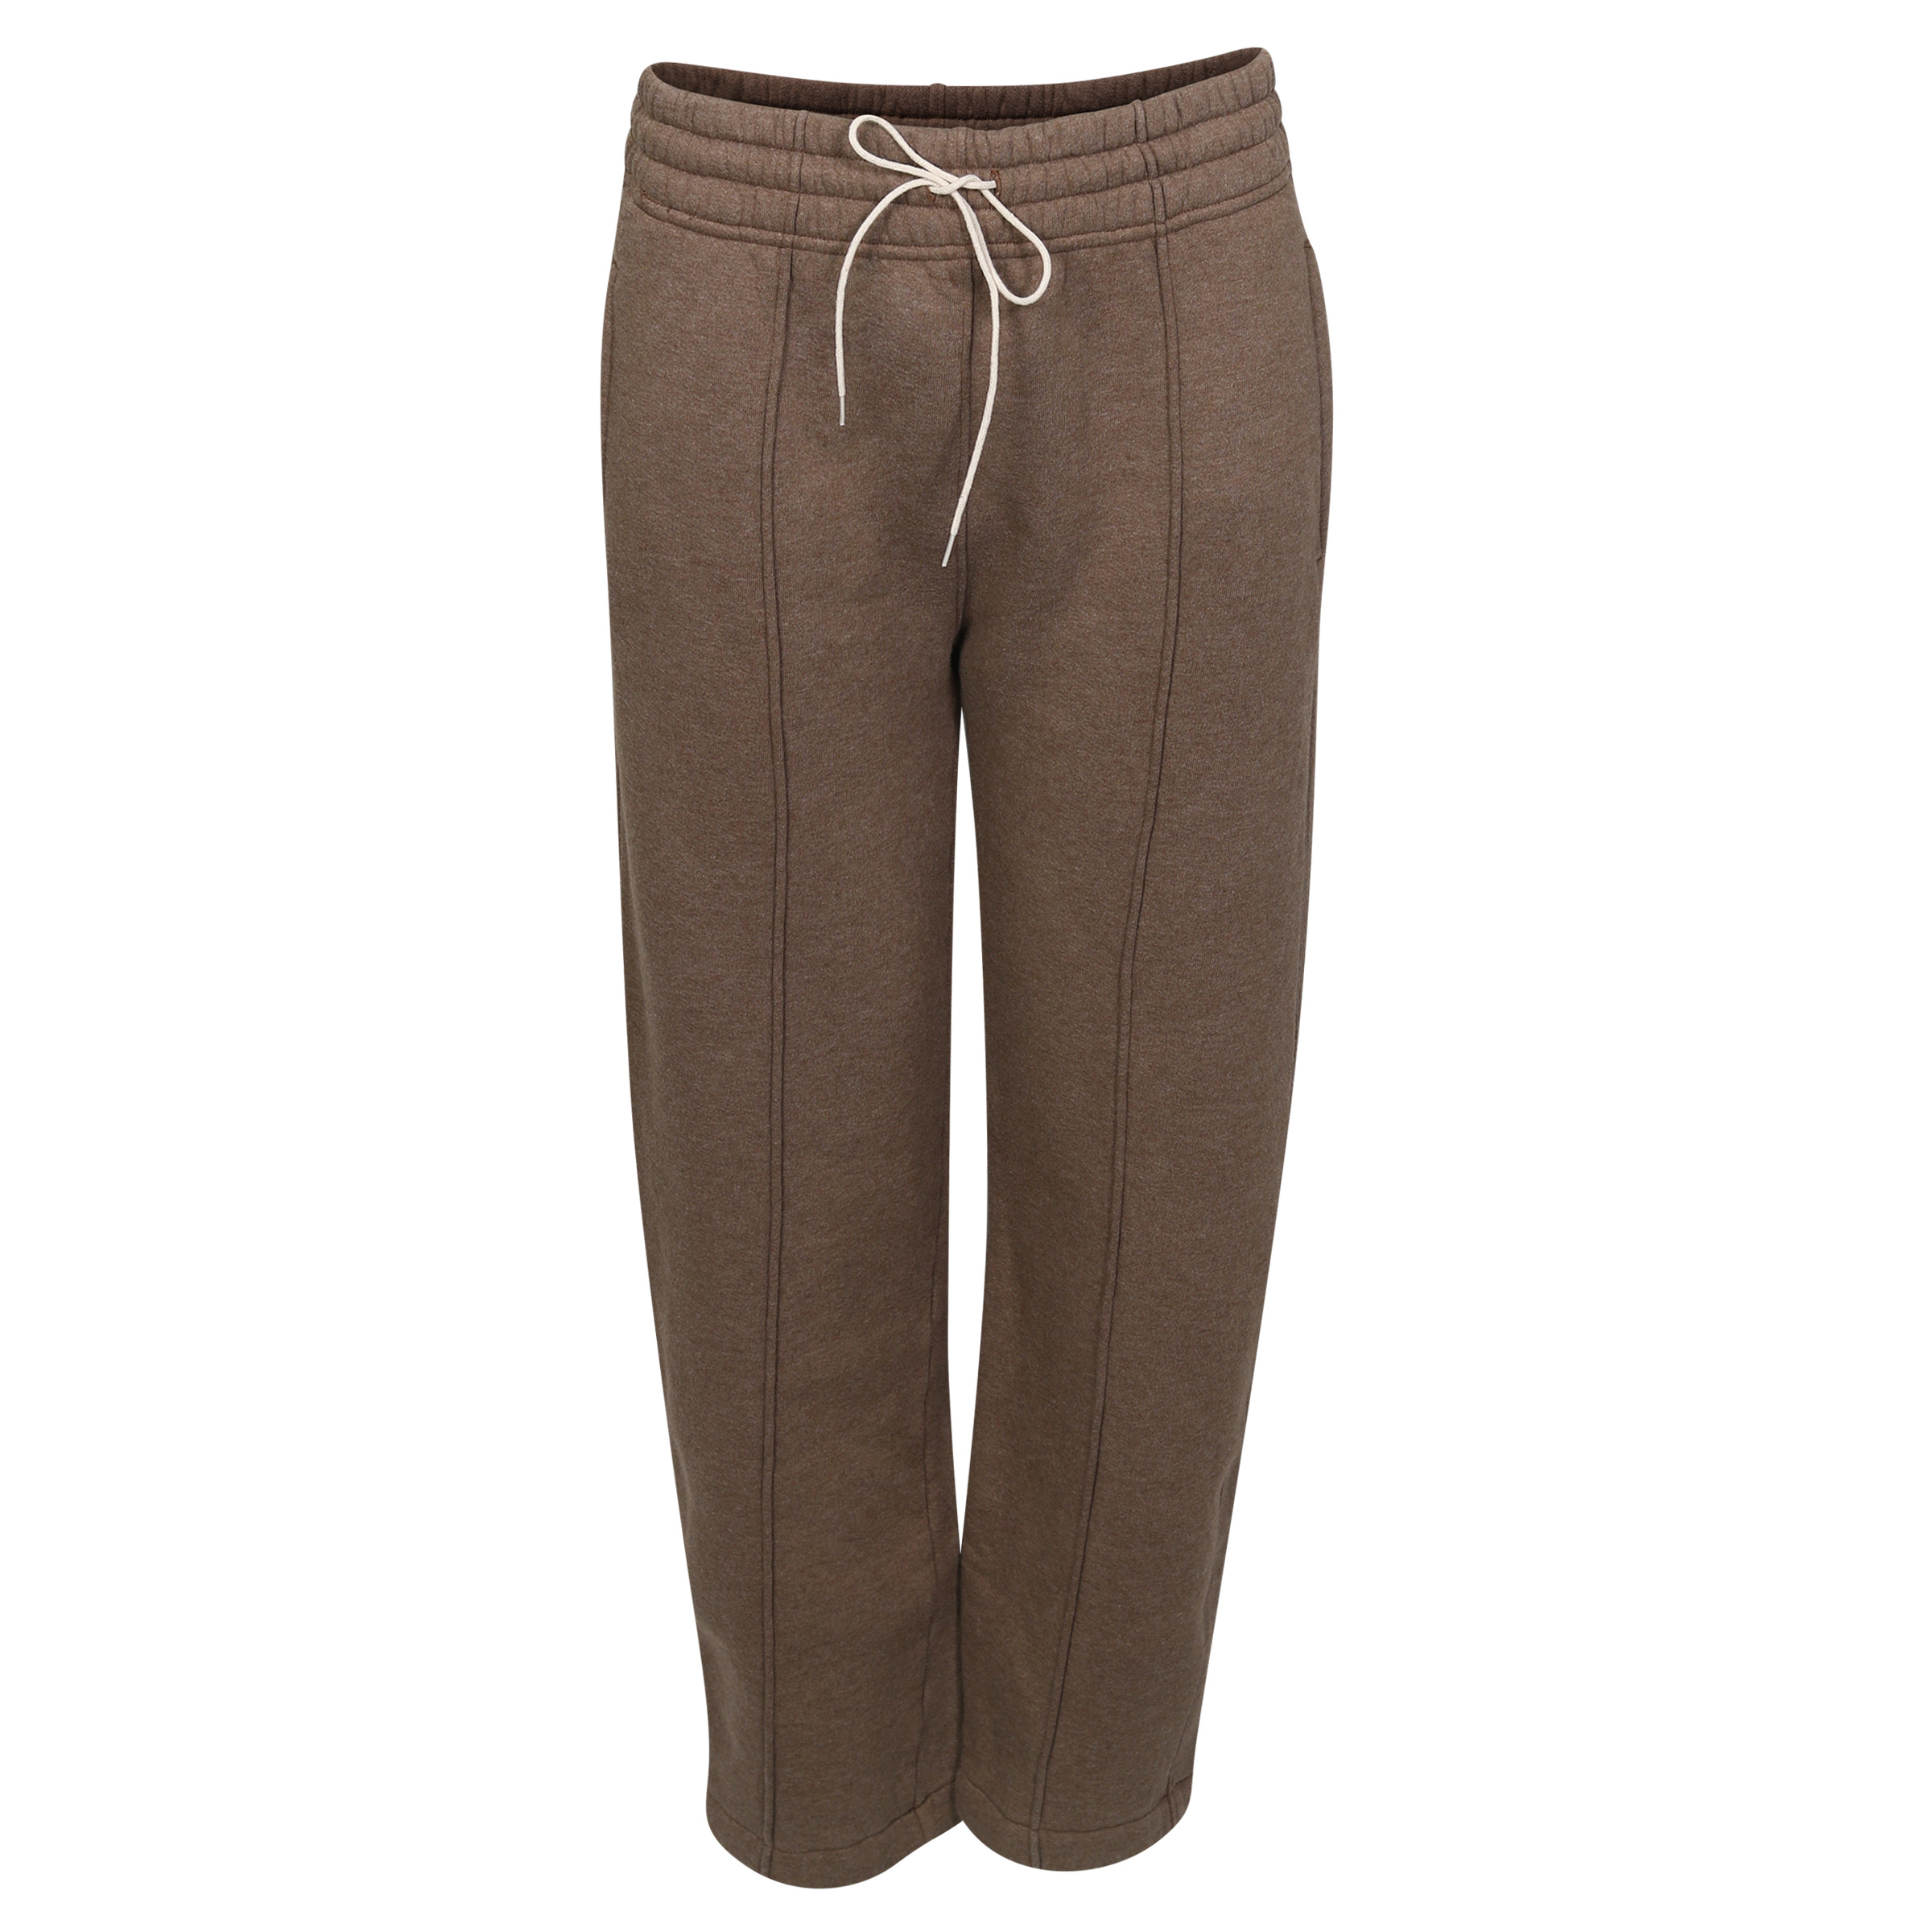 Agolde 90s Sweatpant in Heather Toffee